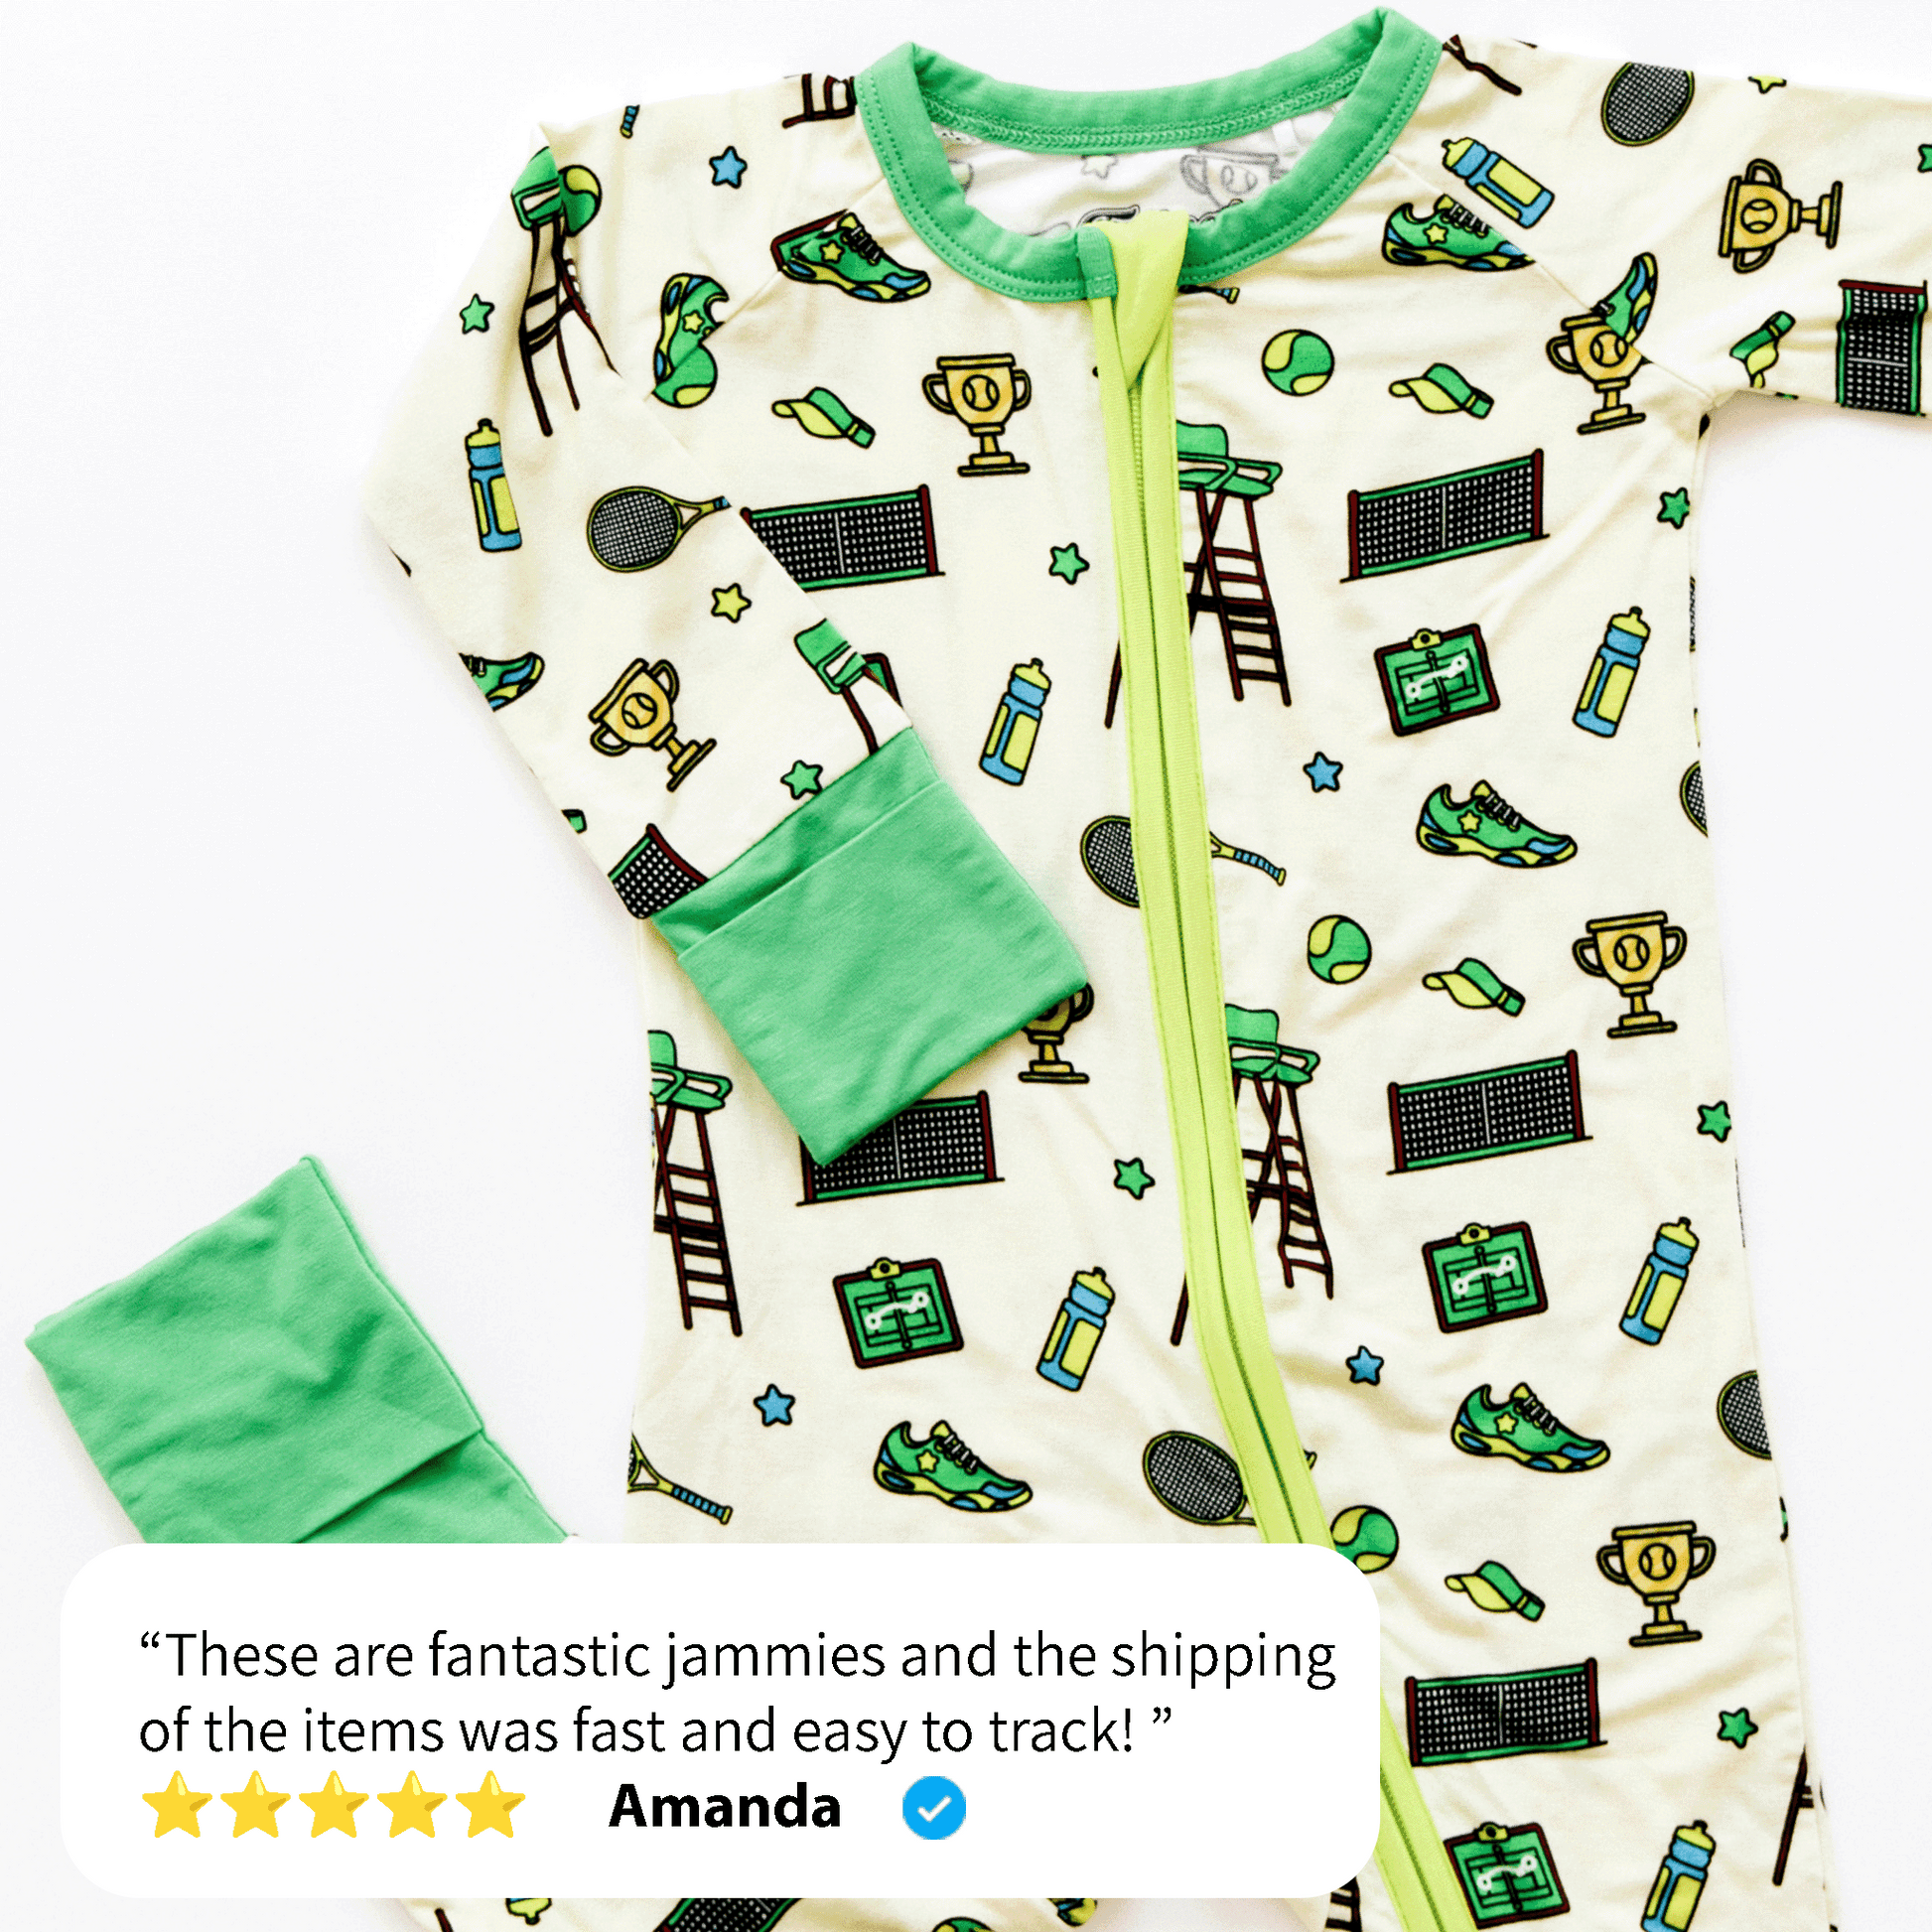 A green and white infant's zip-up onesie featuring sports-themed illustrations such as trophies, sneakers, and tennis rackets, next to a customer review. The review praises the quality and shipping speed of Tailgate Tikes' Tennis Onesie, rated five stars by Amanda.